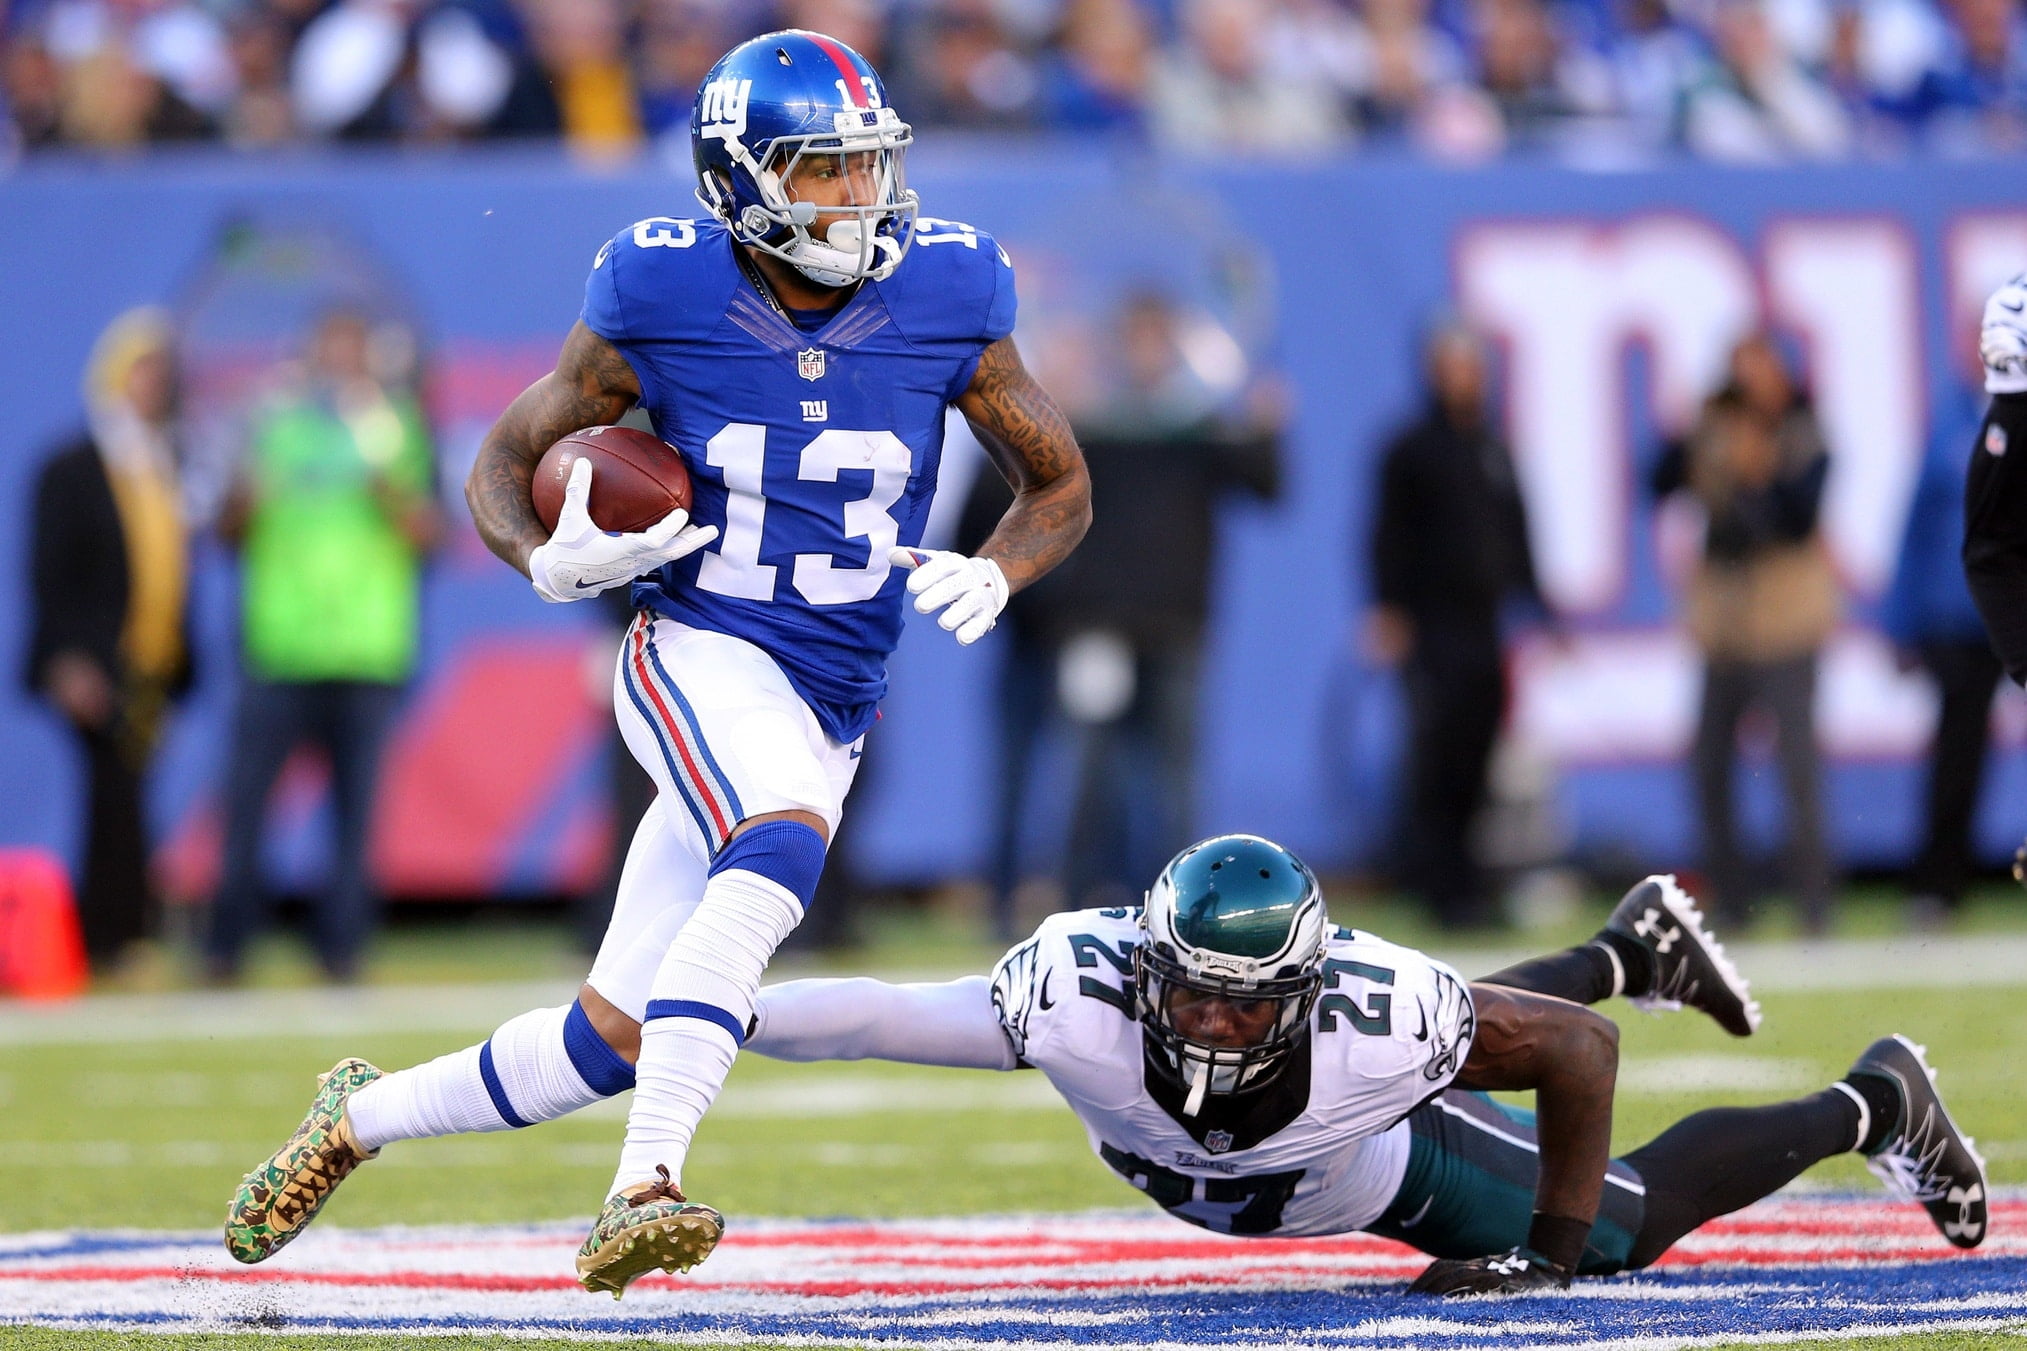 Browns acquiring OBJ from Giants